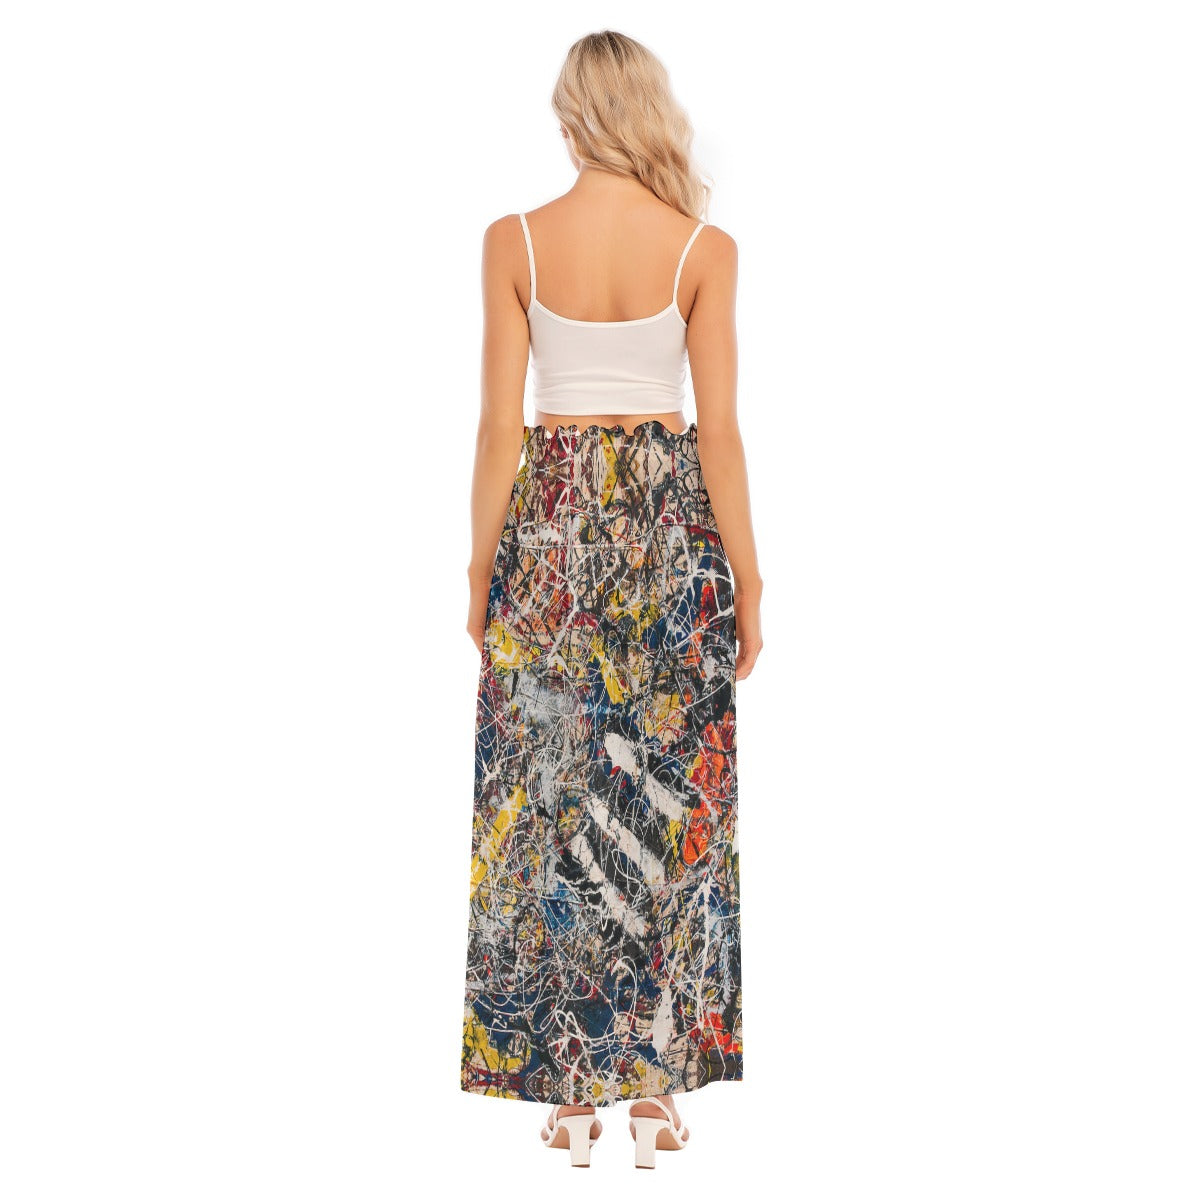 Number 17A by Jackson Pollock Skirt